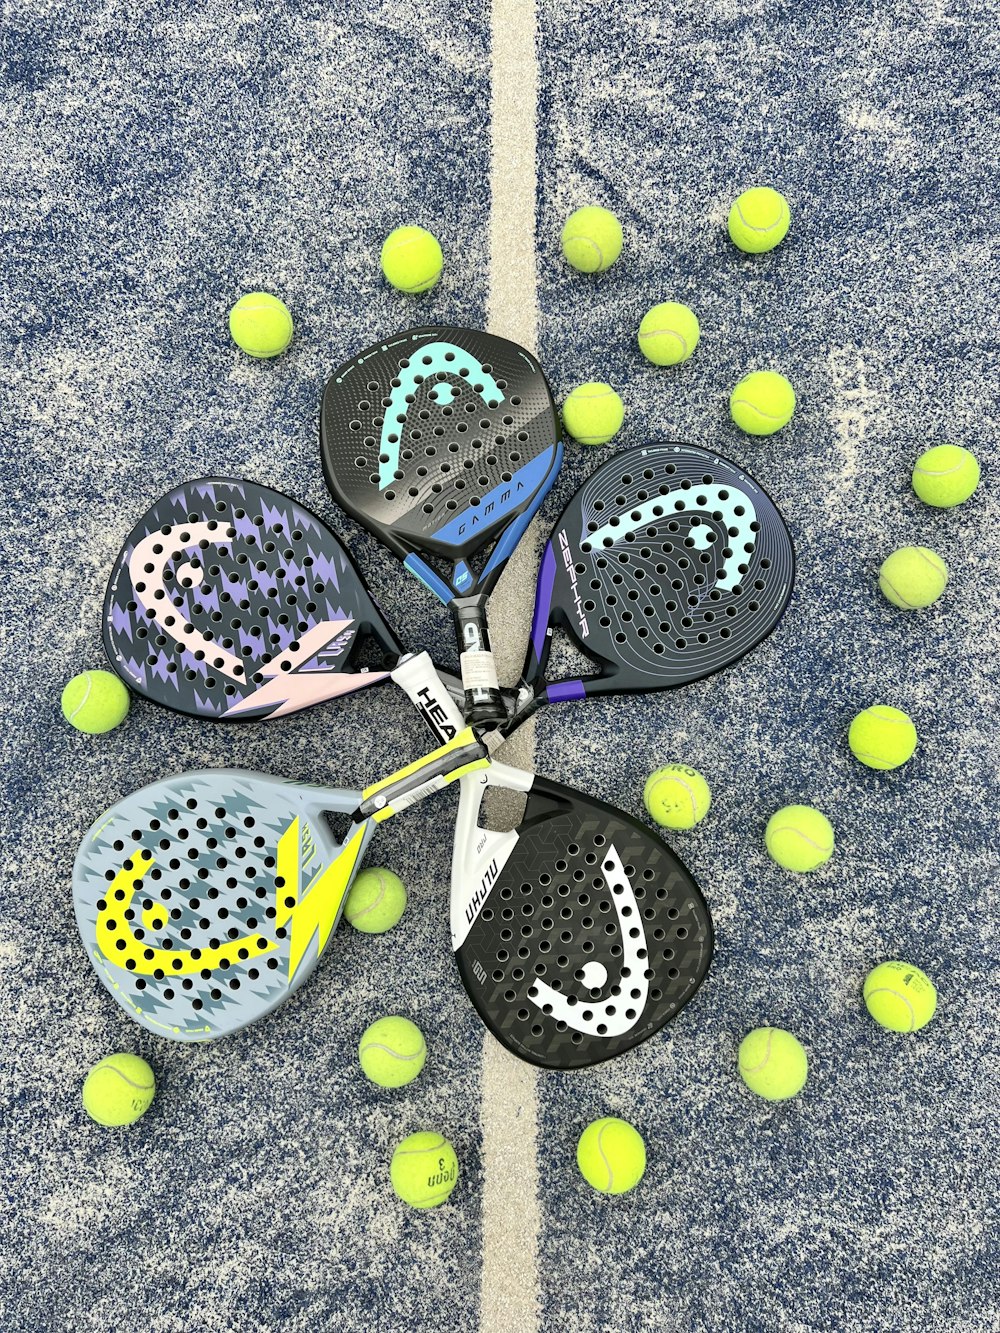 a pair of tennis rackets and balls on the ground